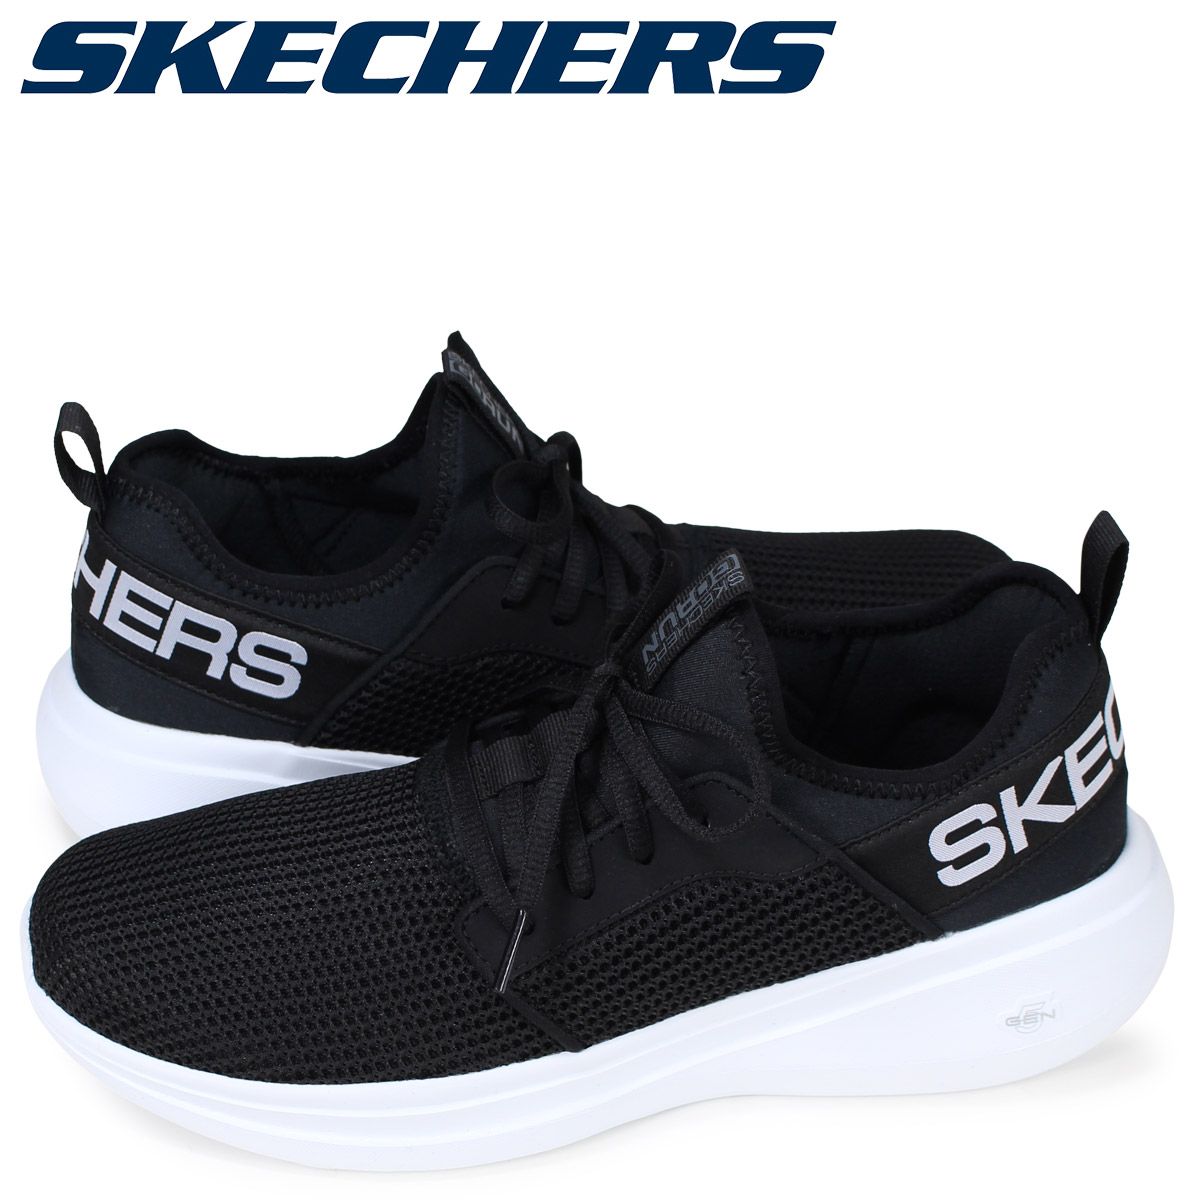 shoes by skechers